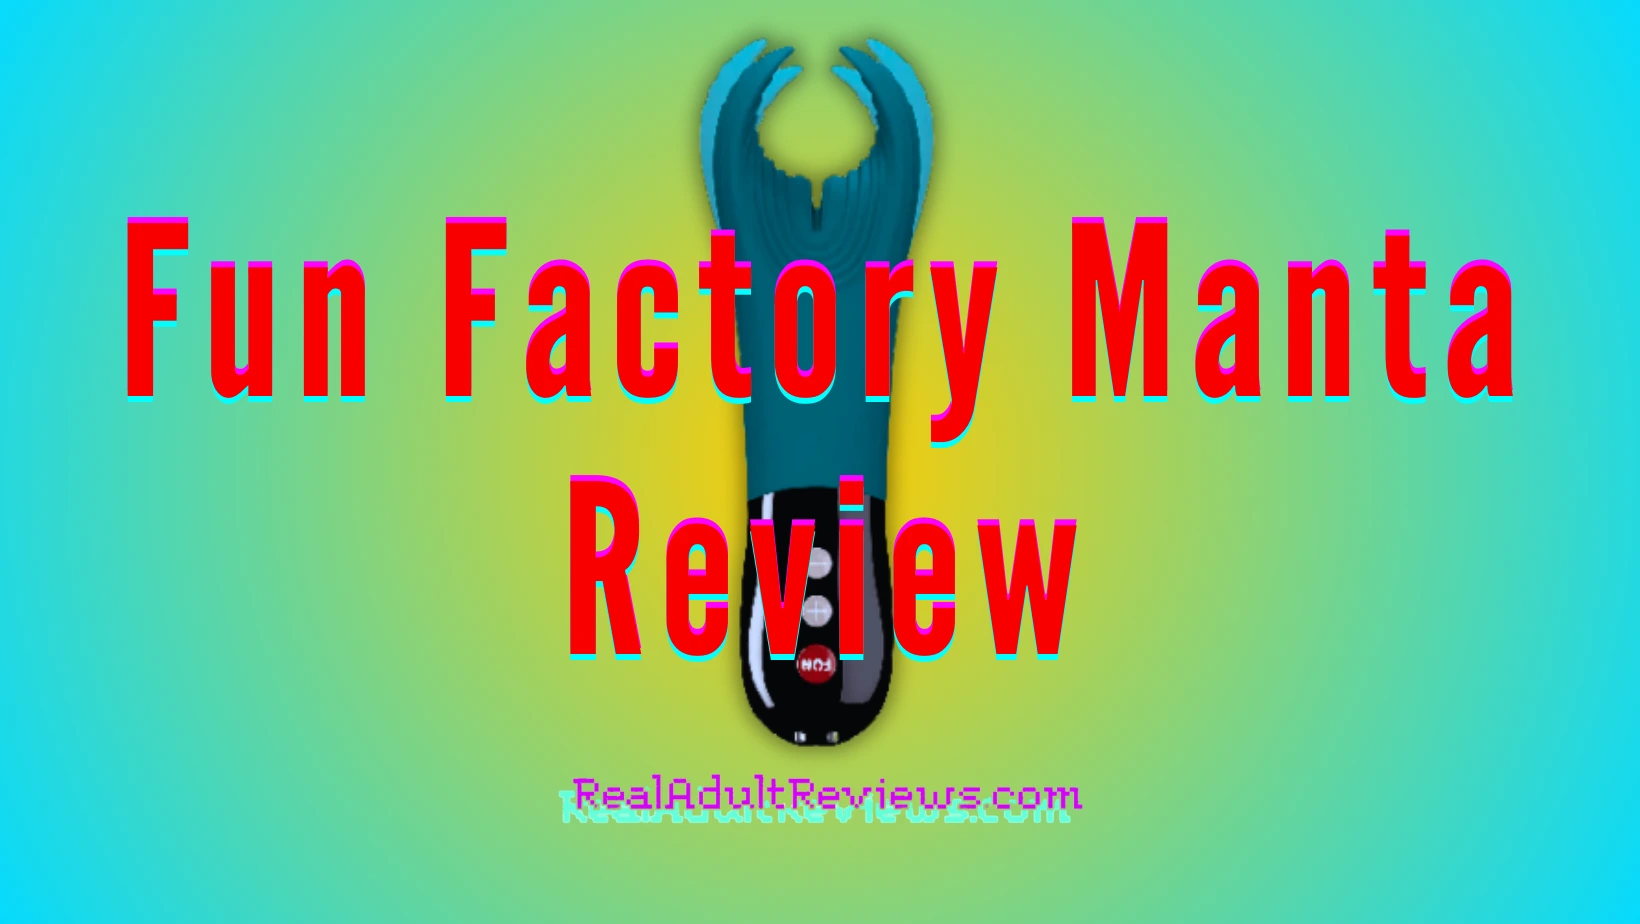 Looking for a Private Sex Assistant? Fun Factory Manta Penis Masturbator Review